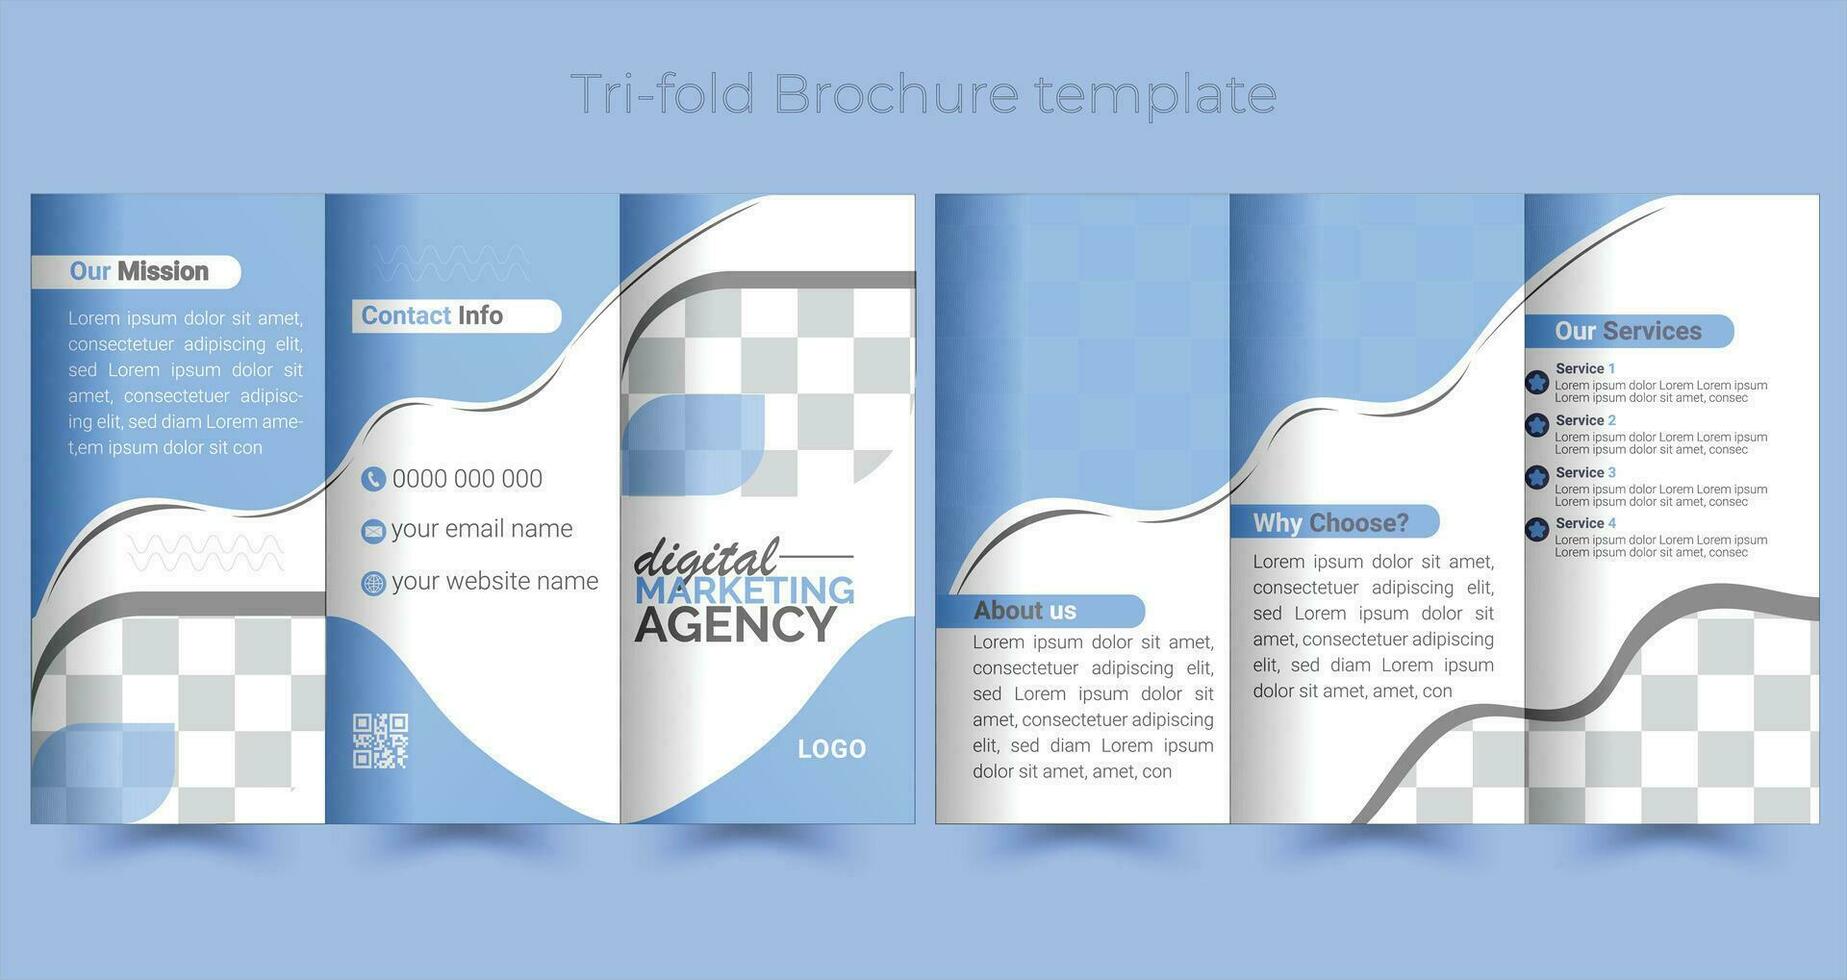 Trifold brochure template for digital marketing agency design Free Vector